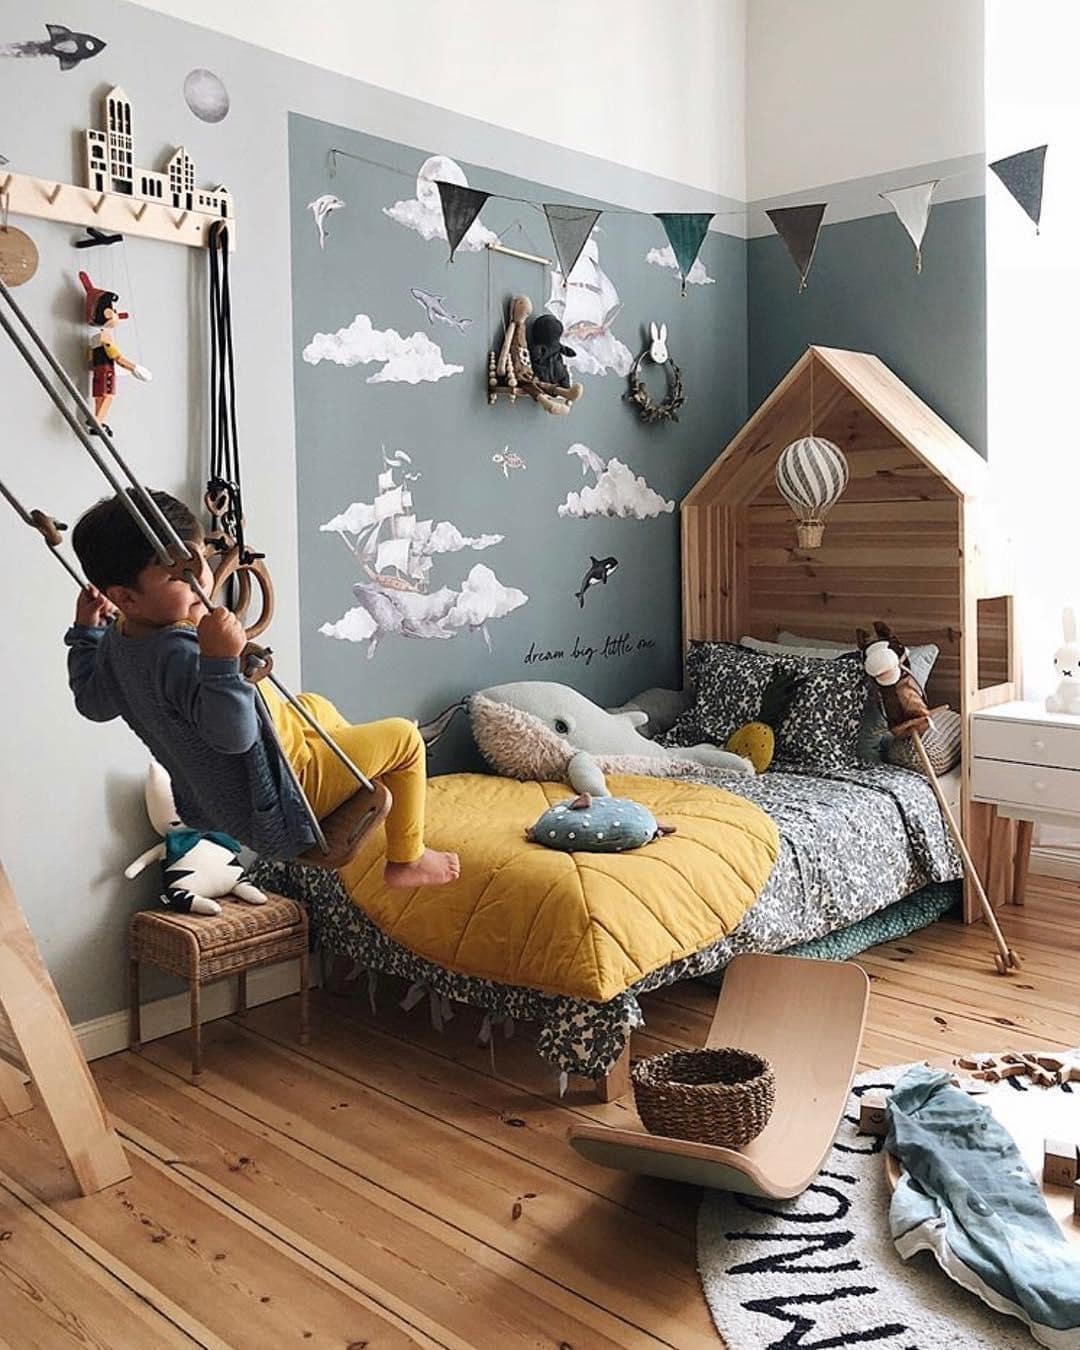 homeinspo: kids' room decor ideas for your little ones - lifestyle